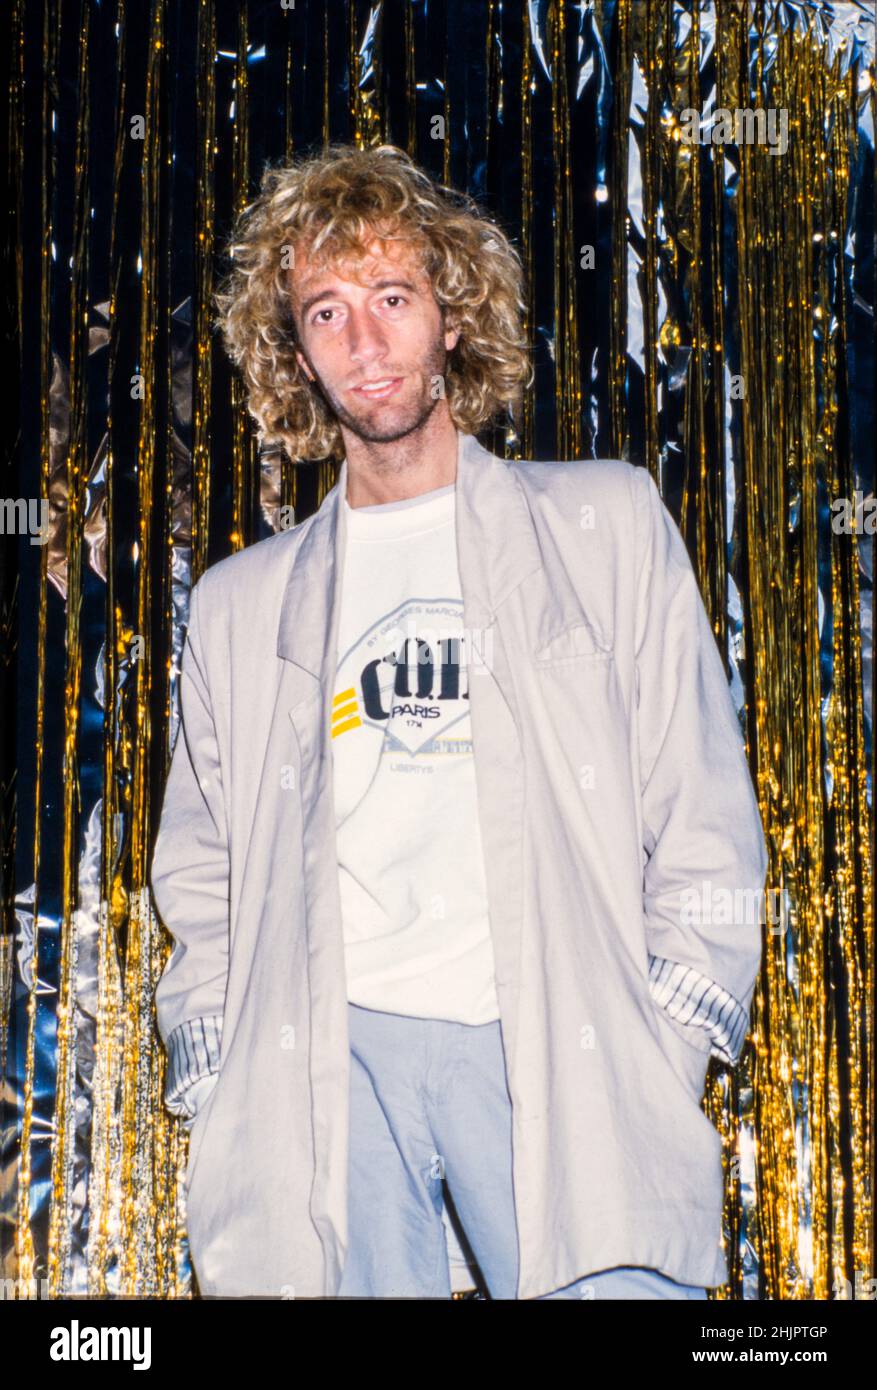 HILVERSUM, THE NETHERLANDS - NOV 03, 1985: Singer Robin Gibb from the Bee Gees. Stock Photo